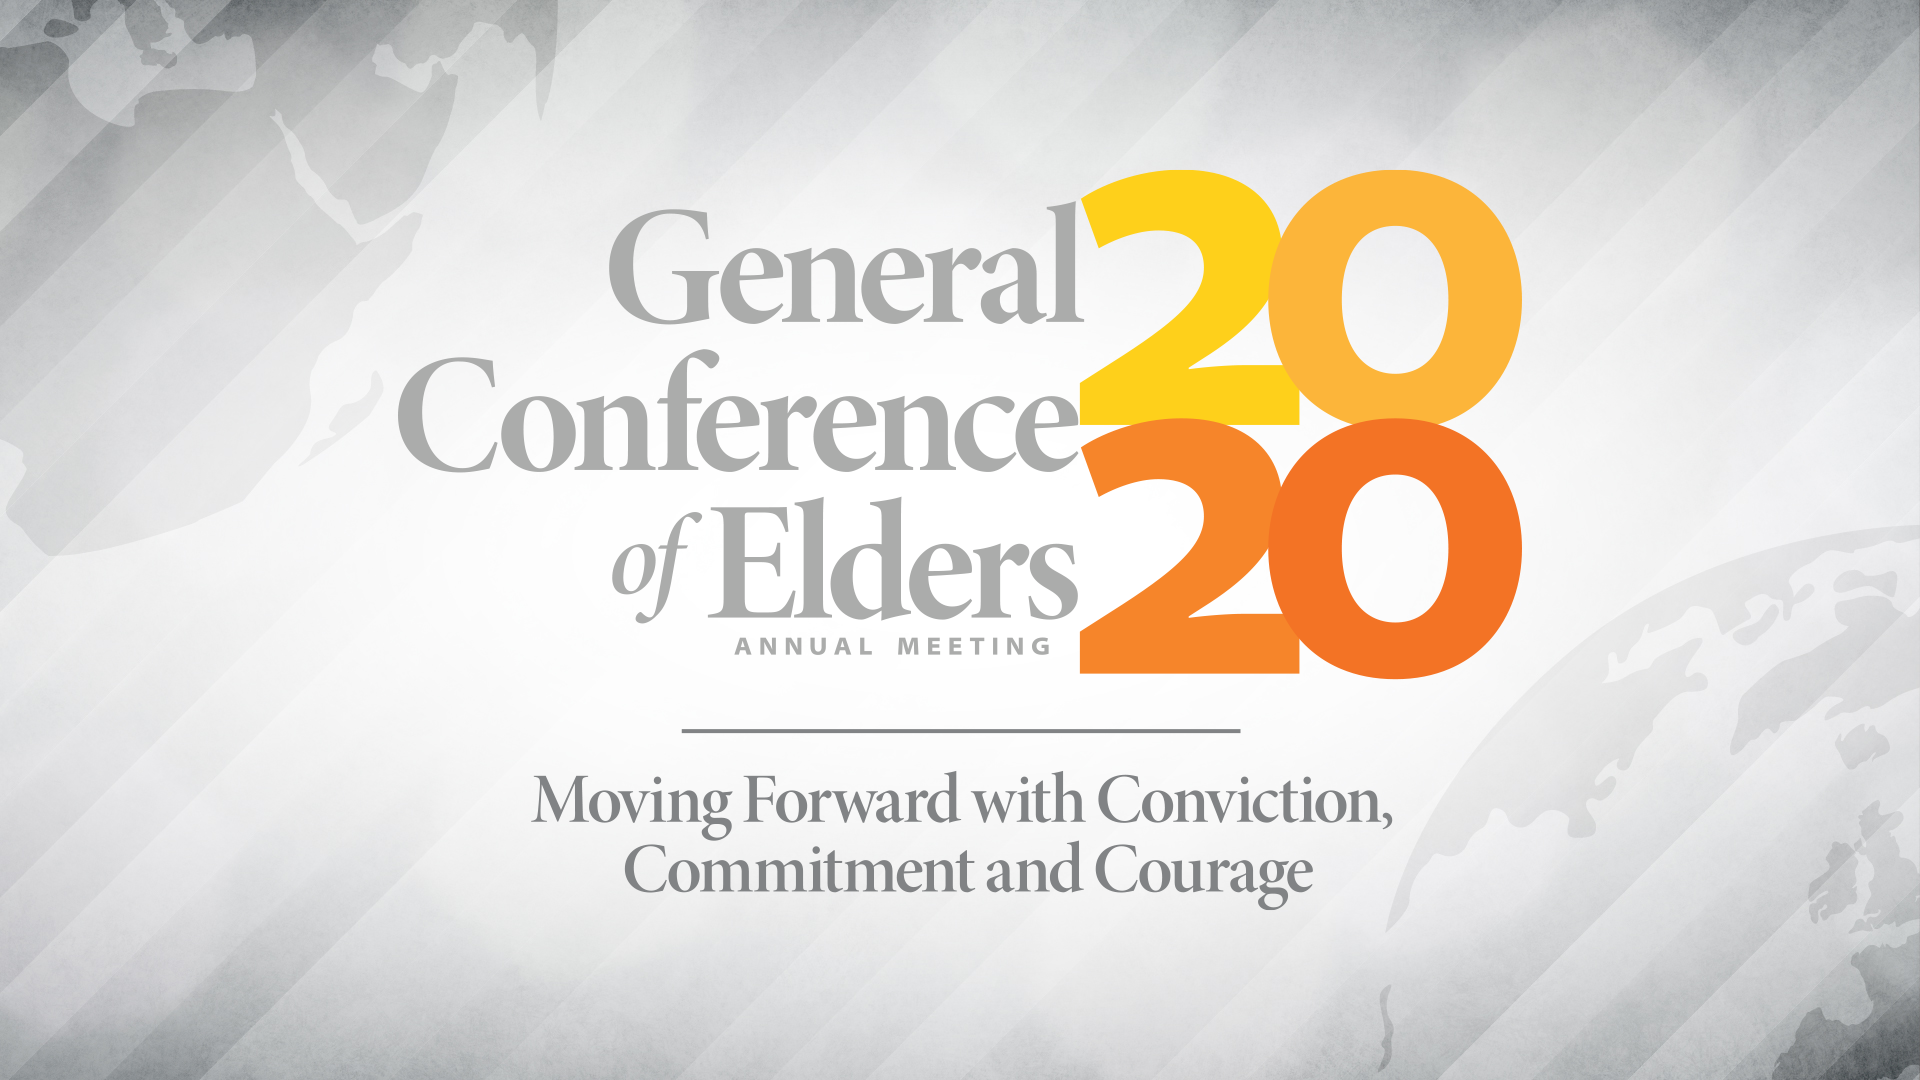 Update from General Conference of Elders Sunday, May 3 United Church